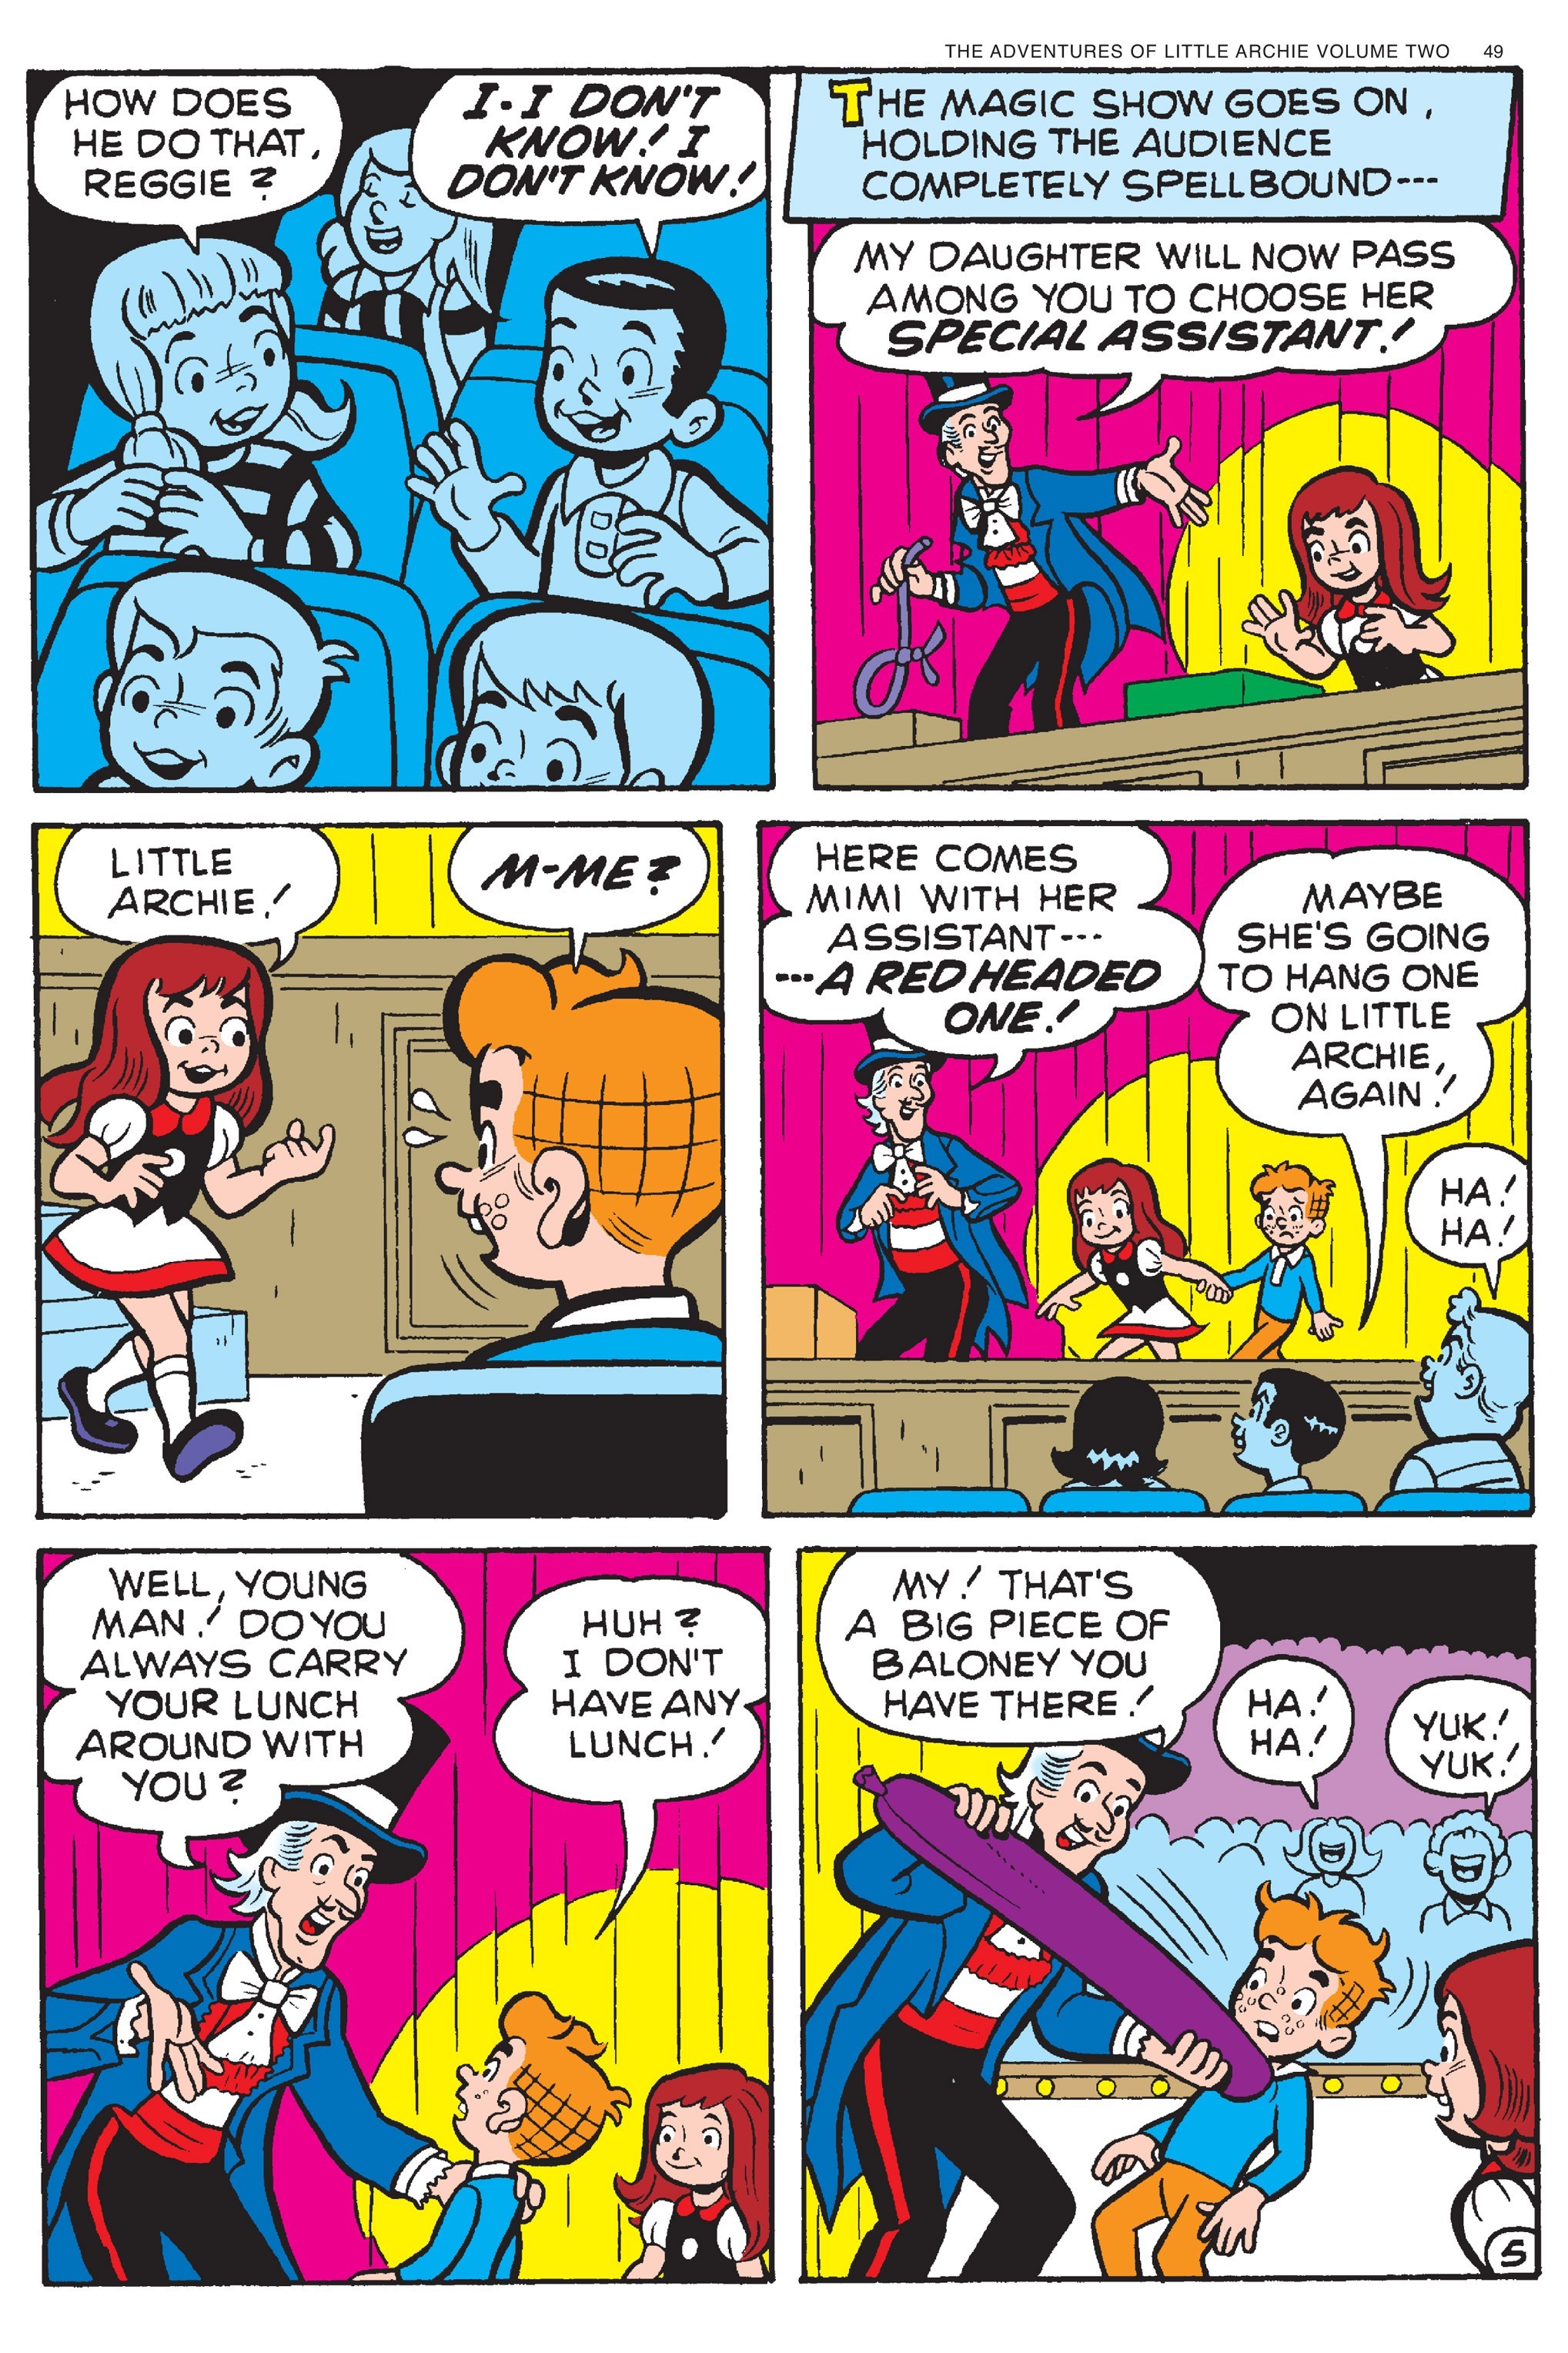 Read online Adventures of Little Archie comic -  Issue # TPB 2 - 50